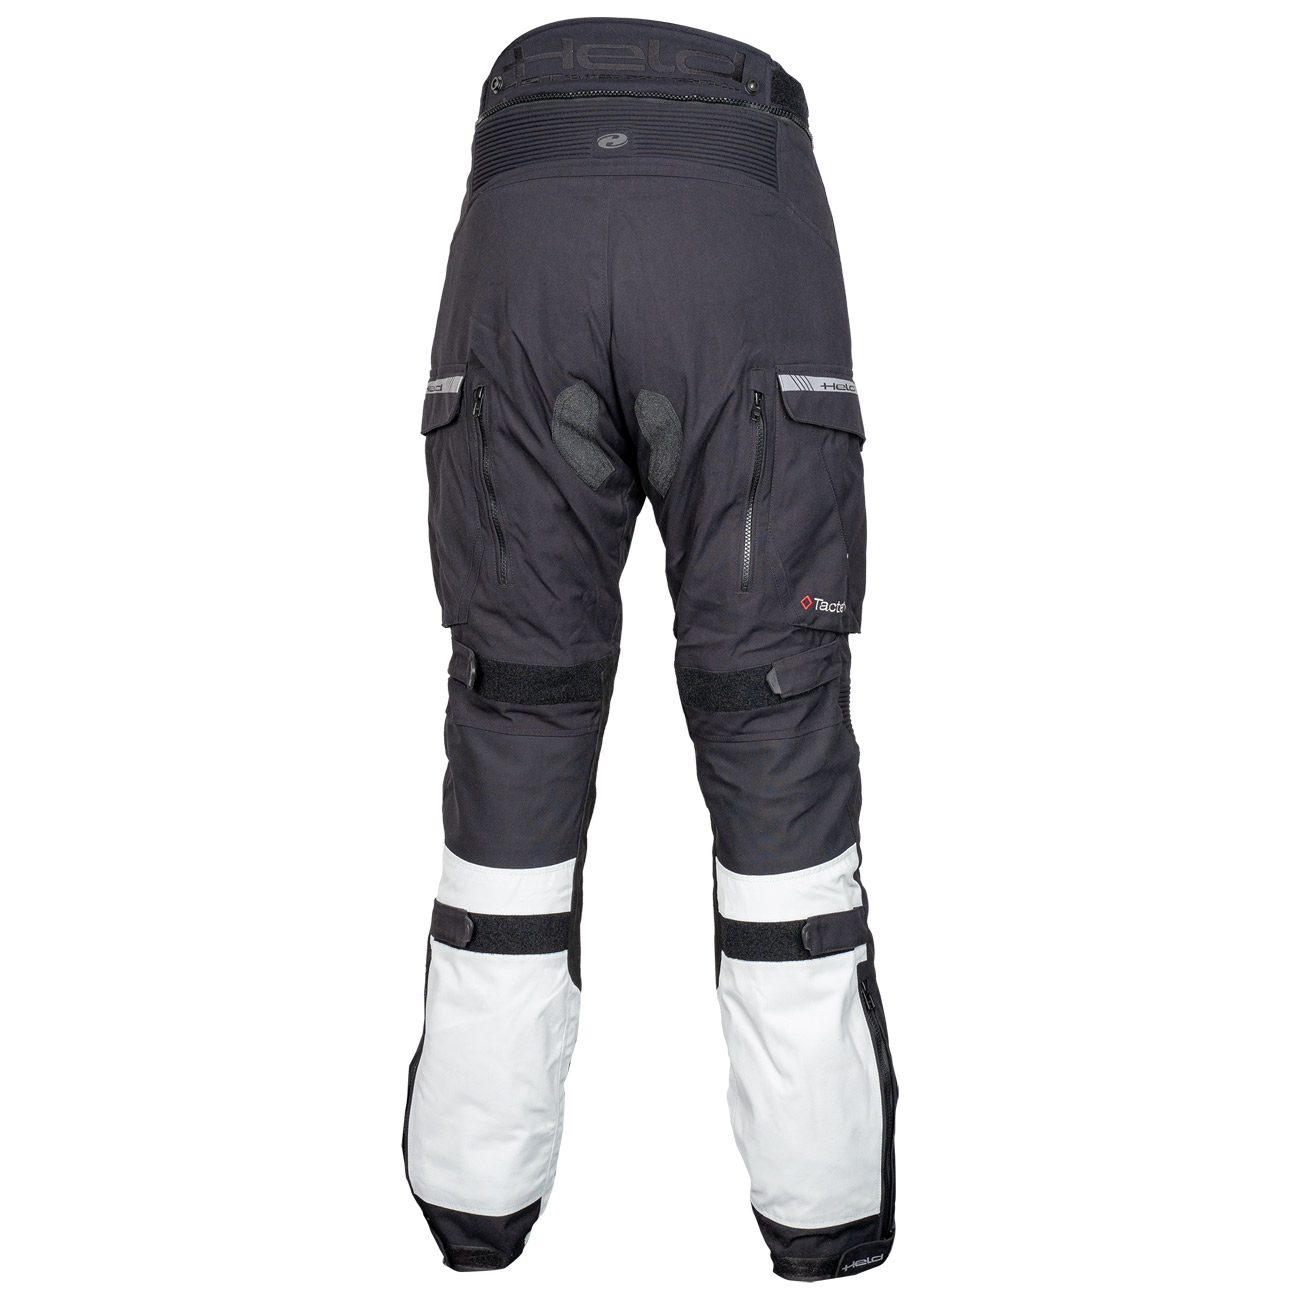 Tridale Base Adventure trousers